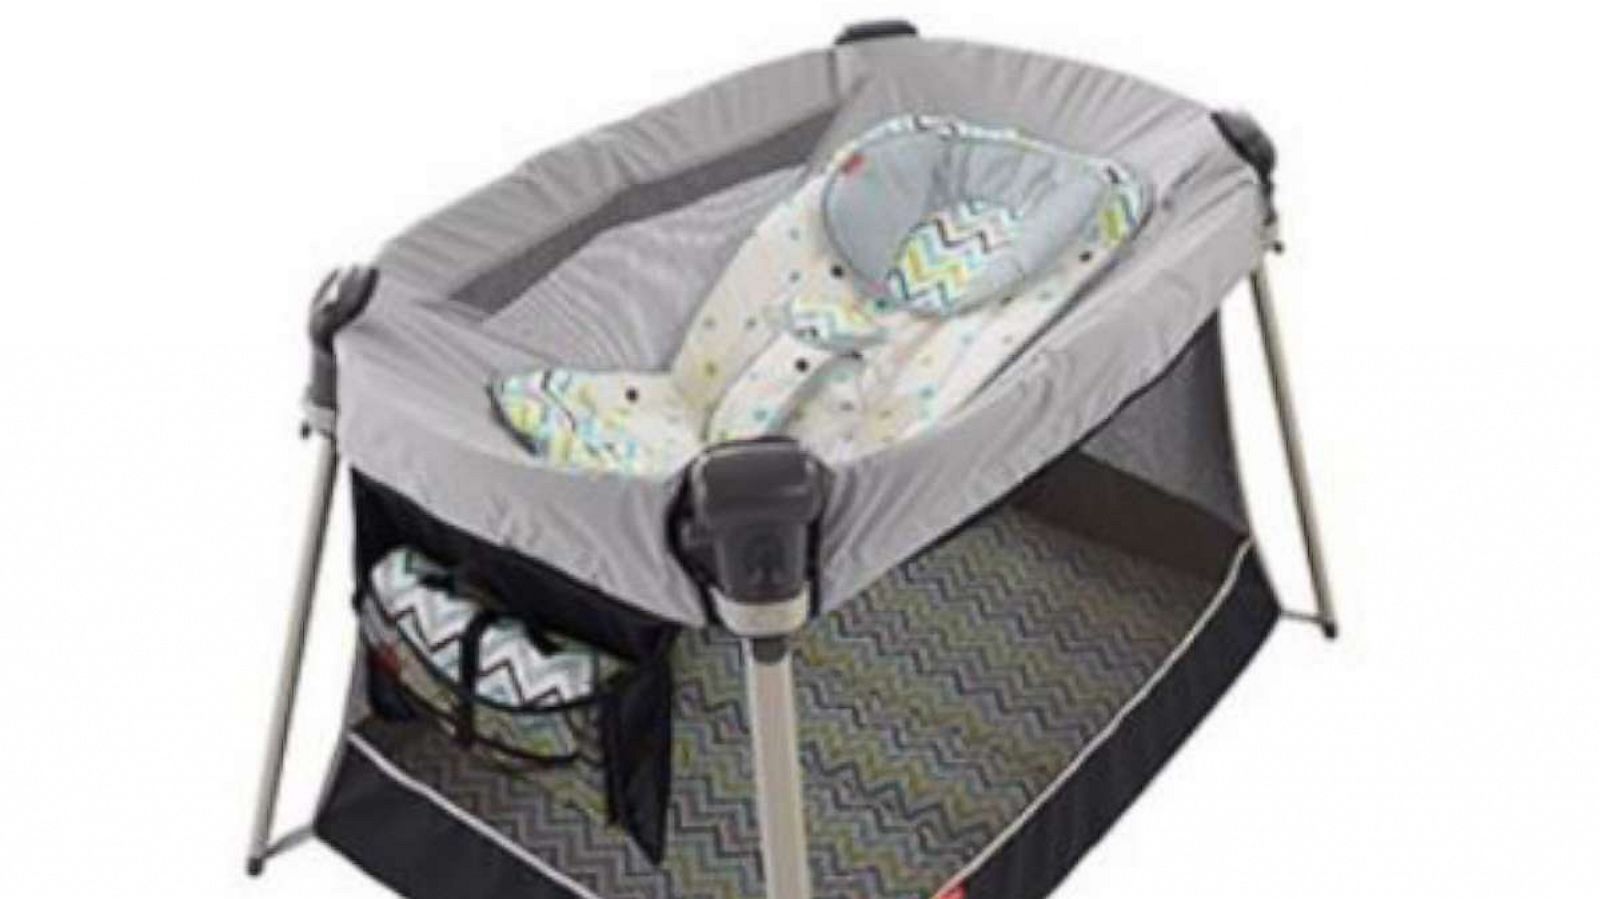 Fisher Price Recalls Ultra Lite Day Night Play Yards Inclined